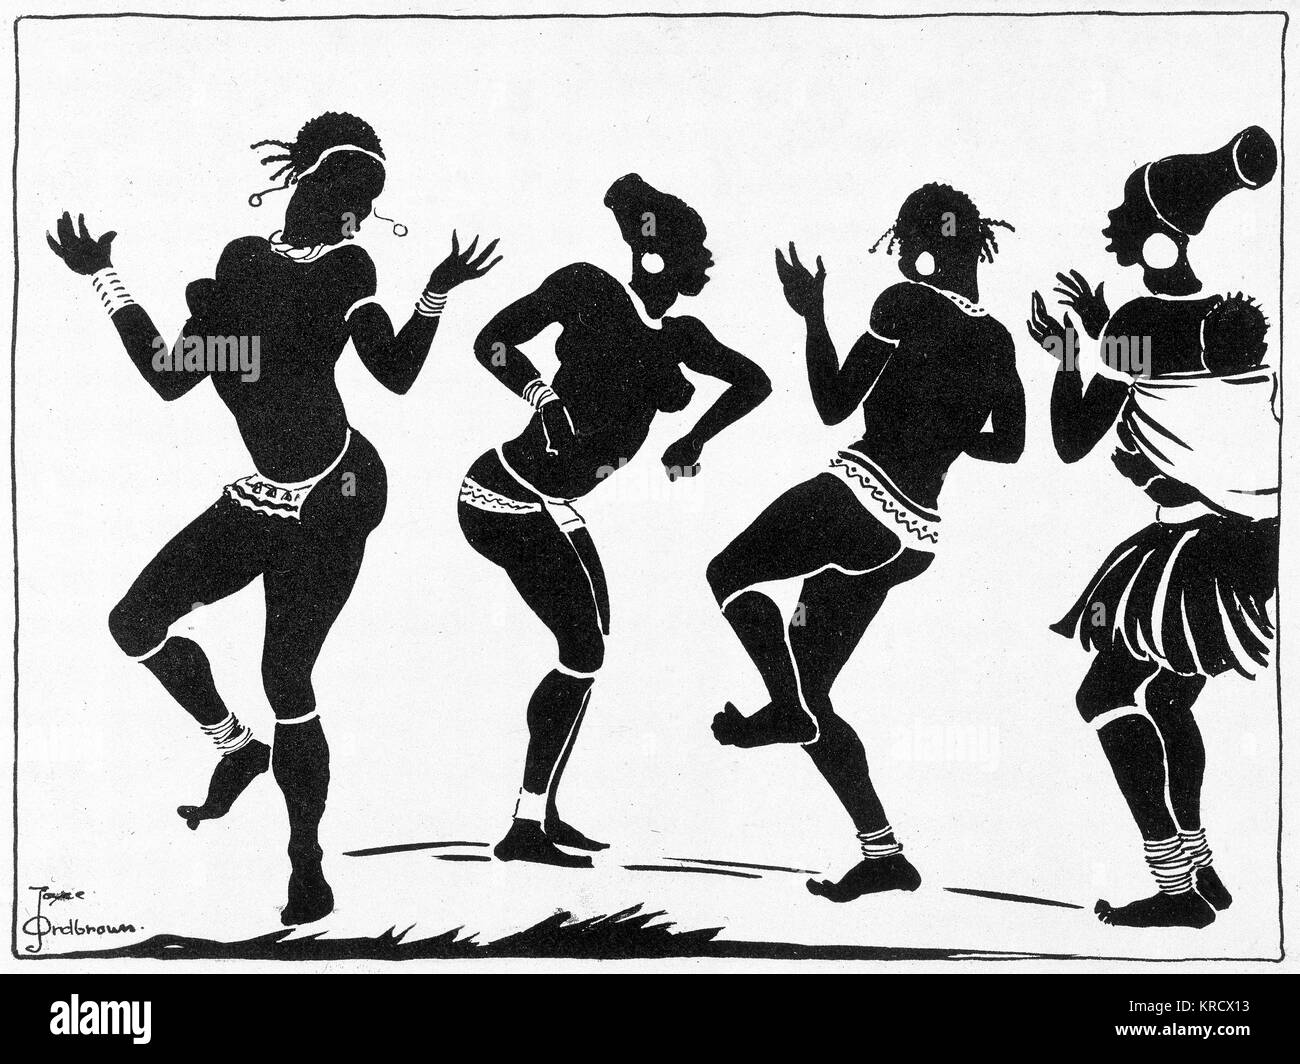 Dancers silhouette Black and White Stock Photos & Images - Alamy